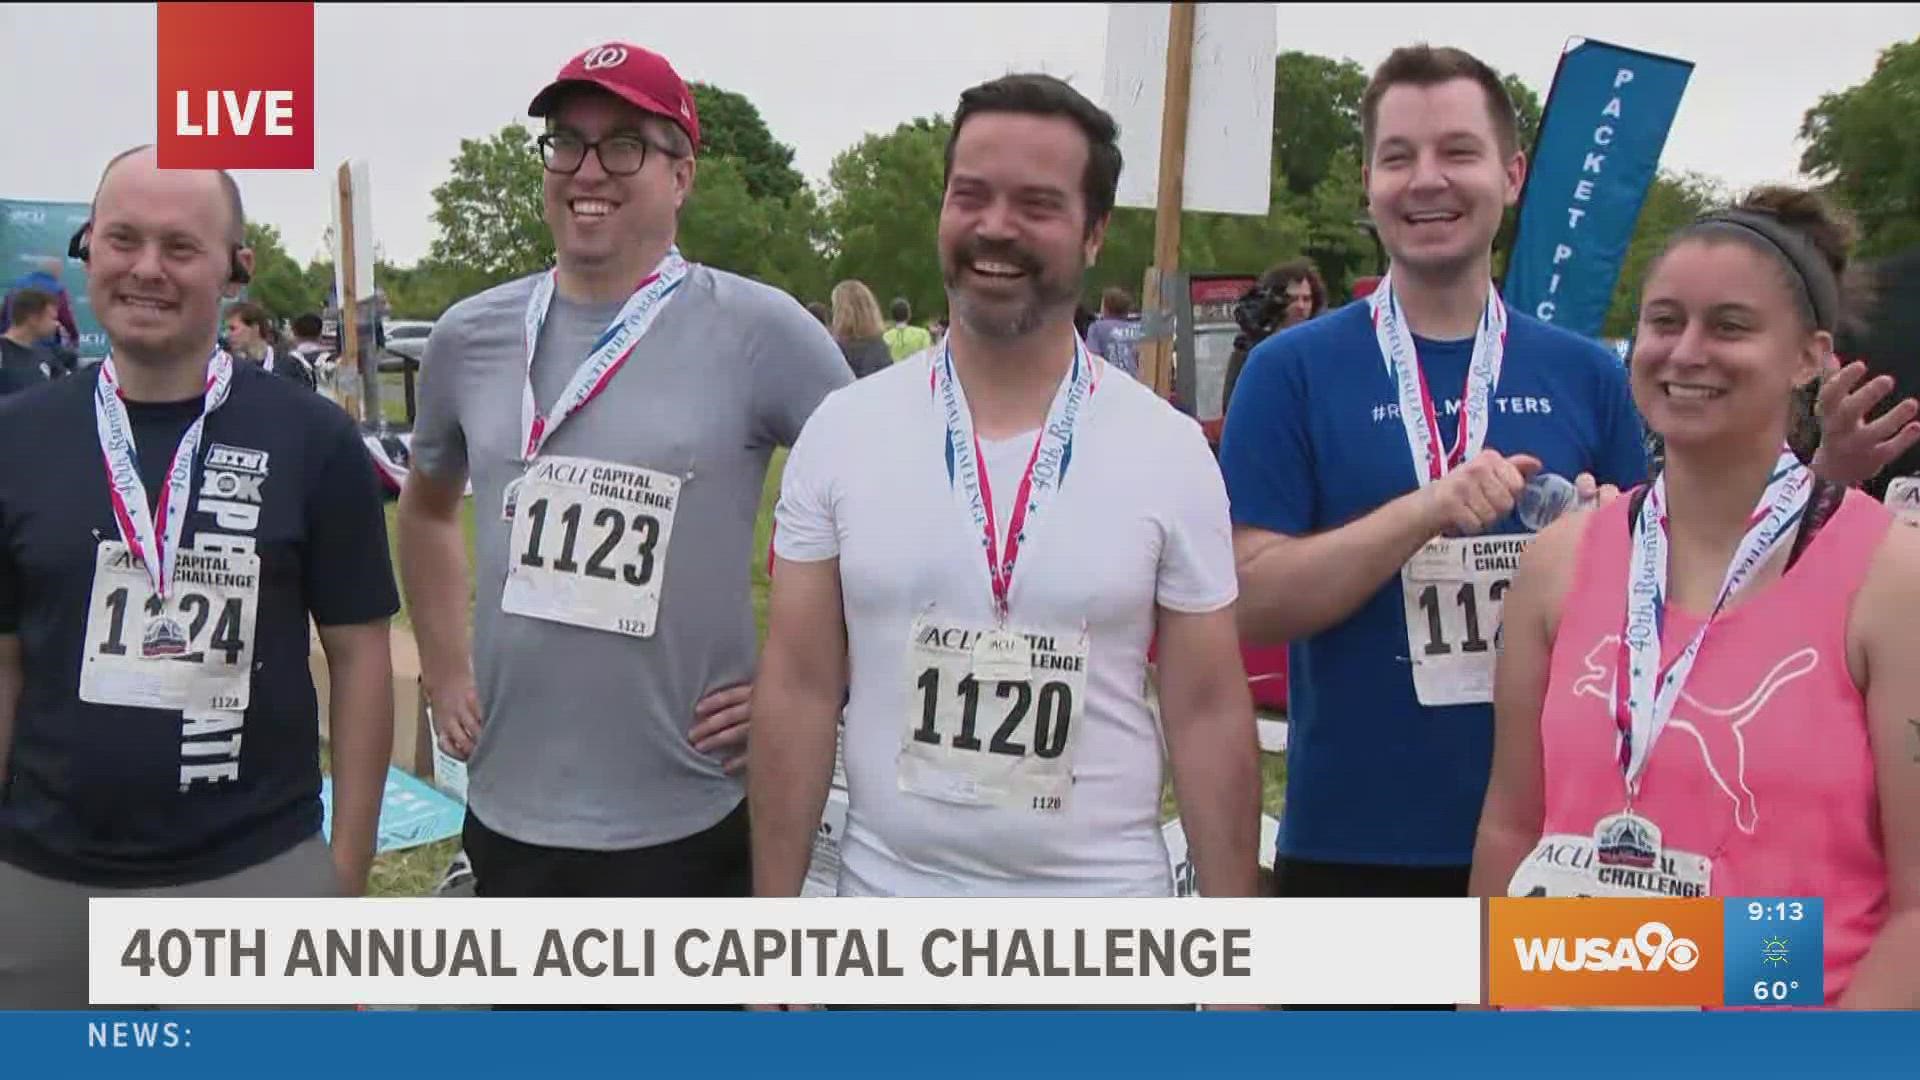 Team WUSA9 competed in the ACLI Capital Challenge, a three mile road race exclusive for members of the three branches of government and the media.